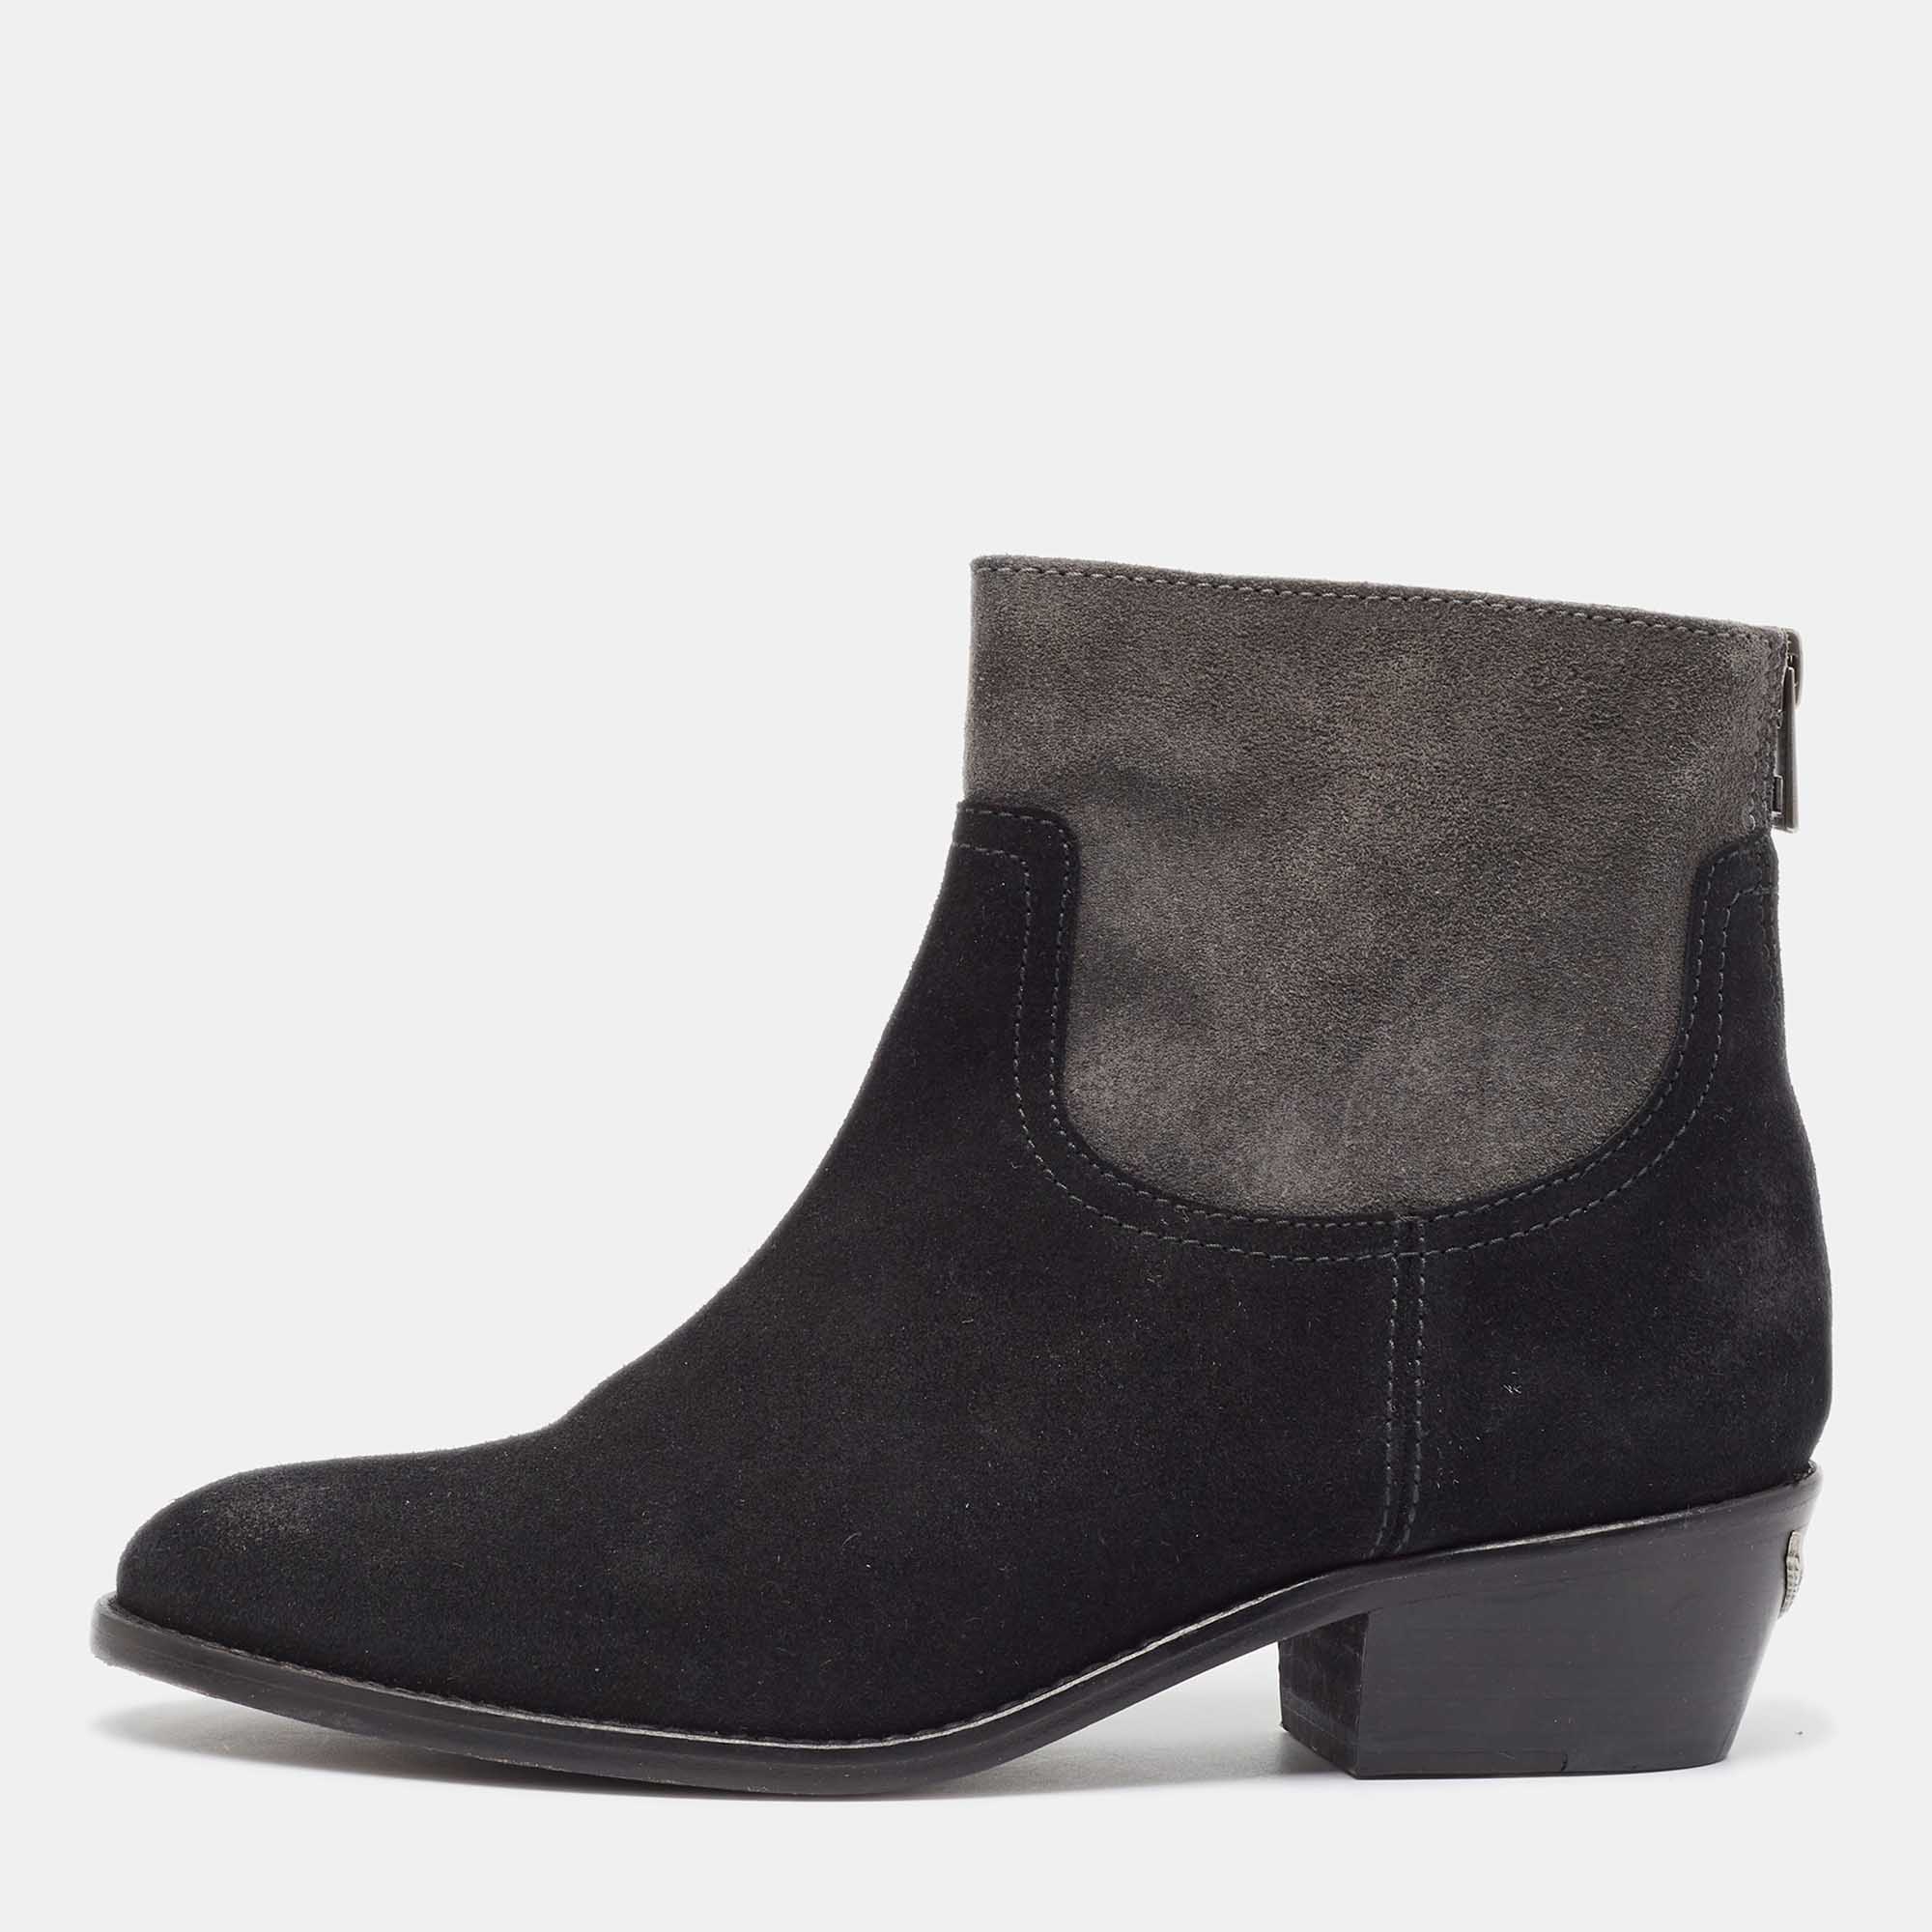 Zadig & voltaire black suede teddy ankle boots size 37